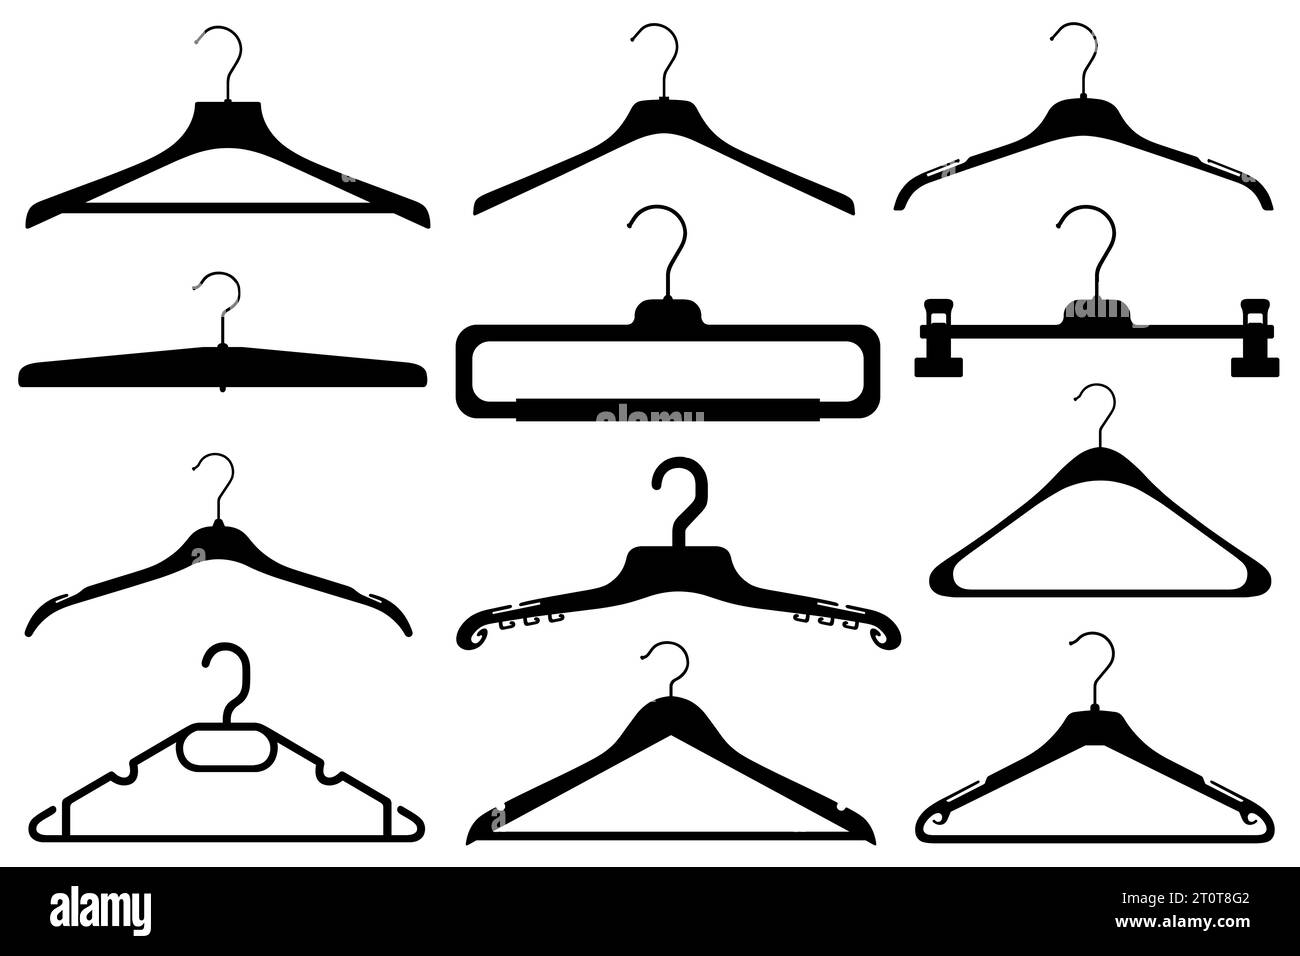 Collection of different coat hangers isolated on white Stock Photo